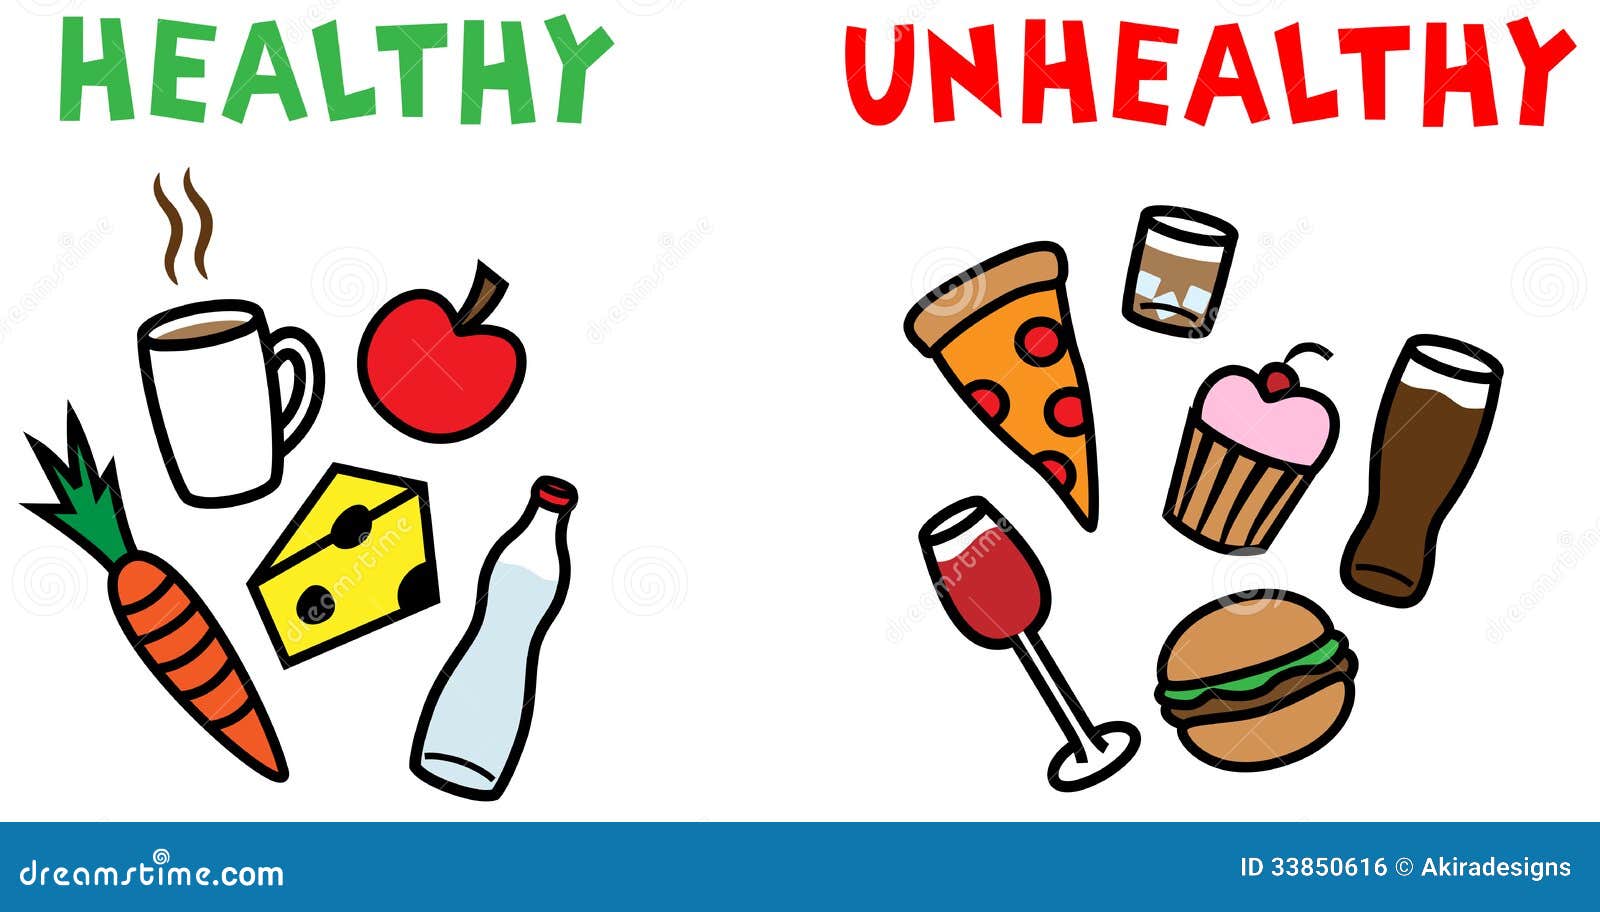 Healthy And Unhealthy Food And Drinks Royalty Free Stock Image - Image ...